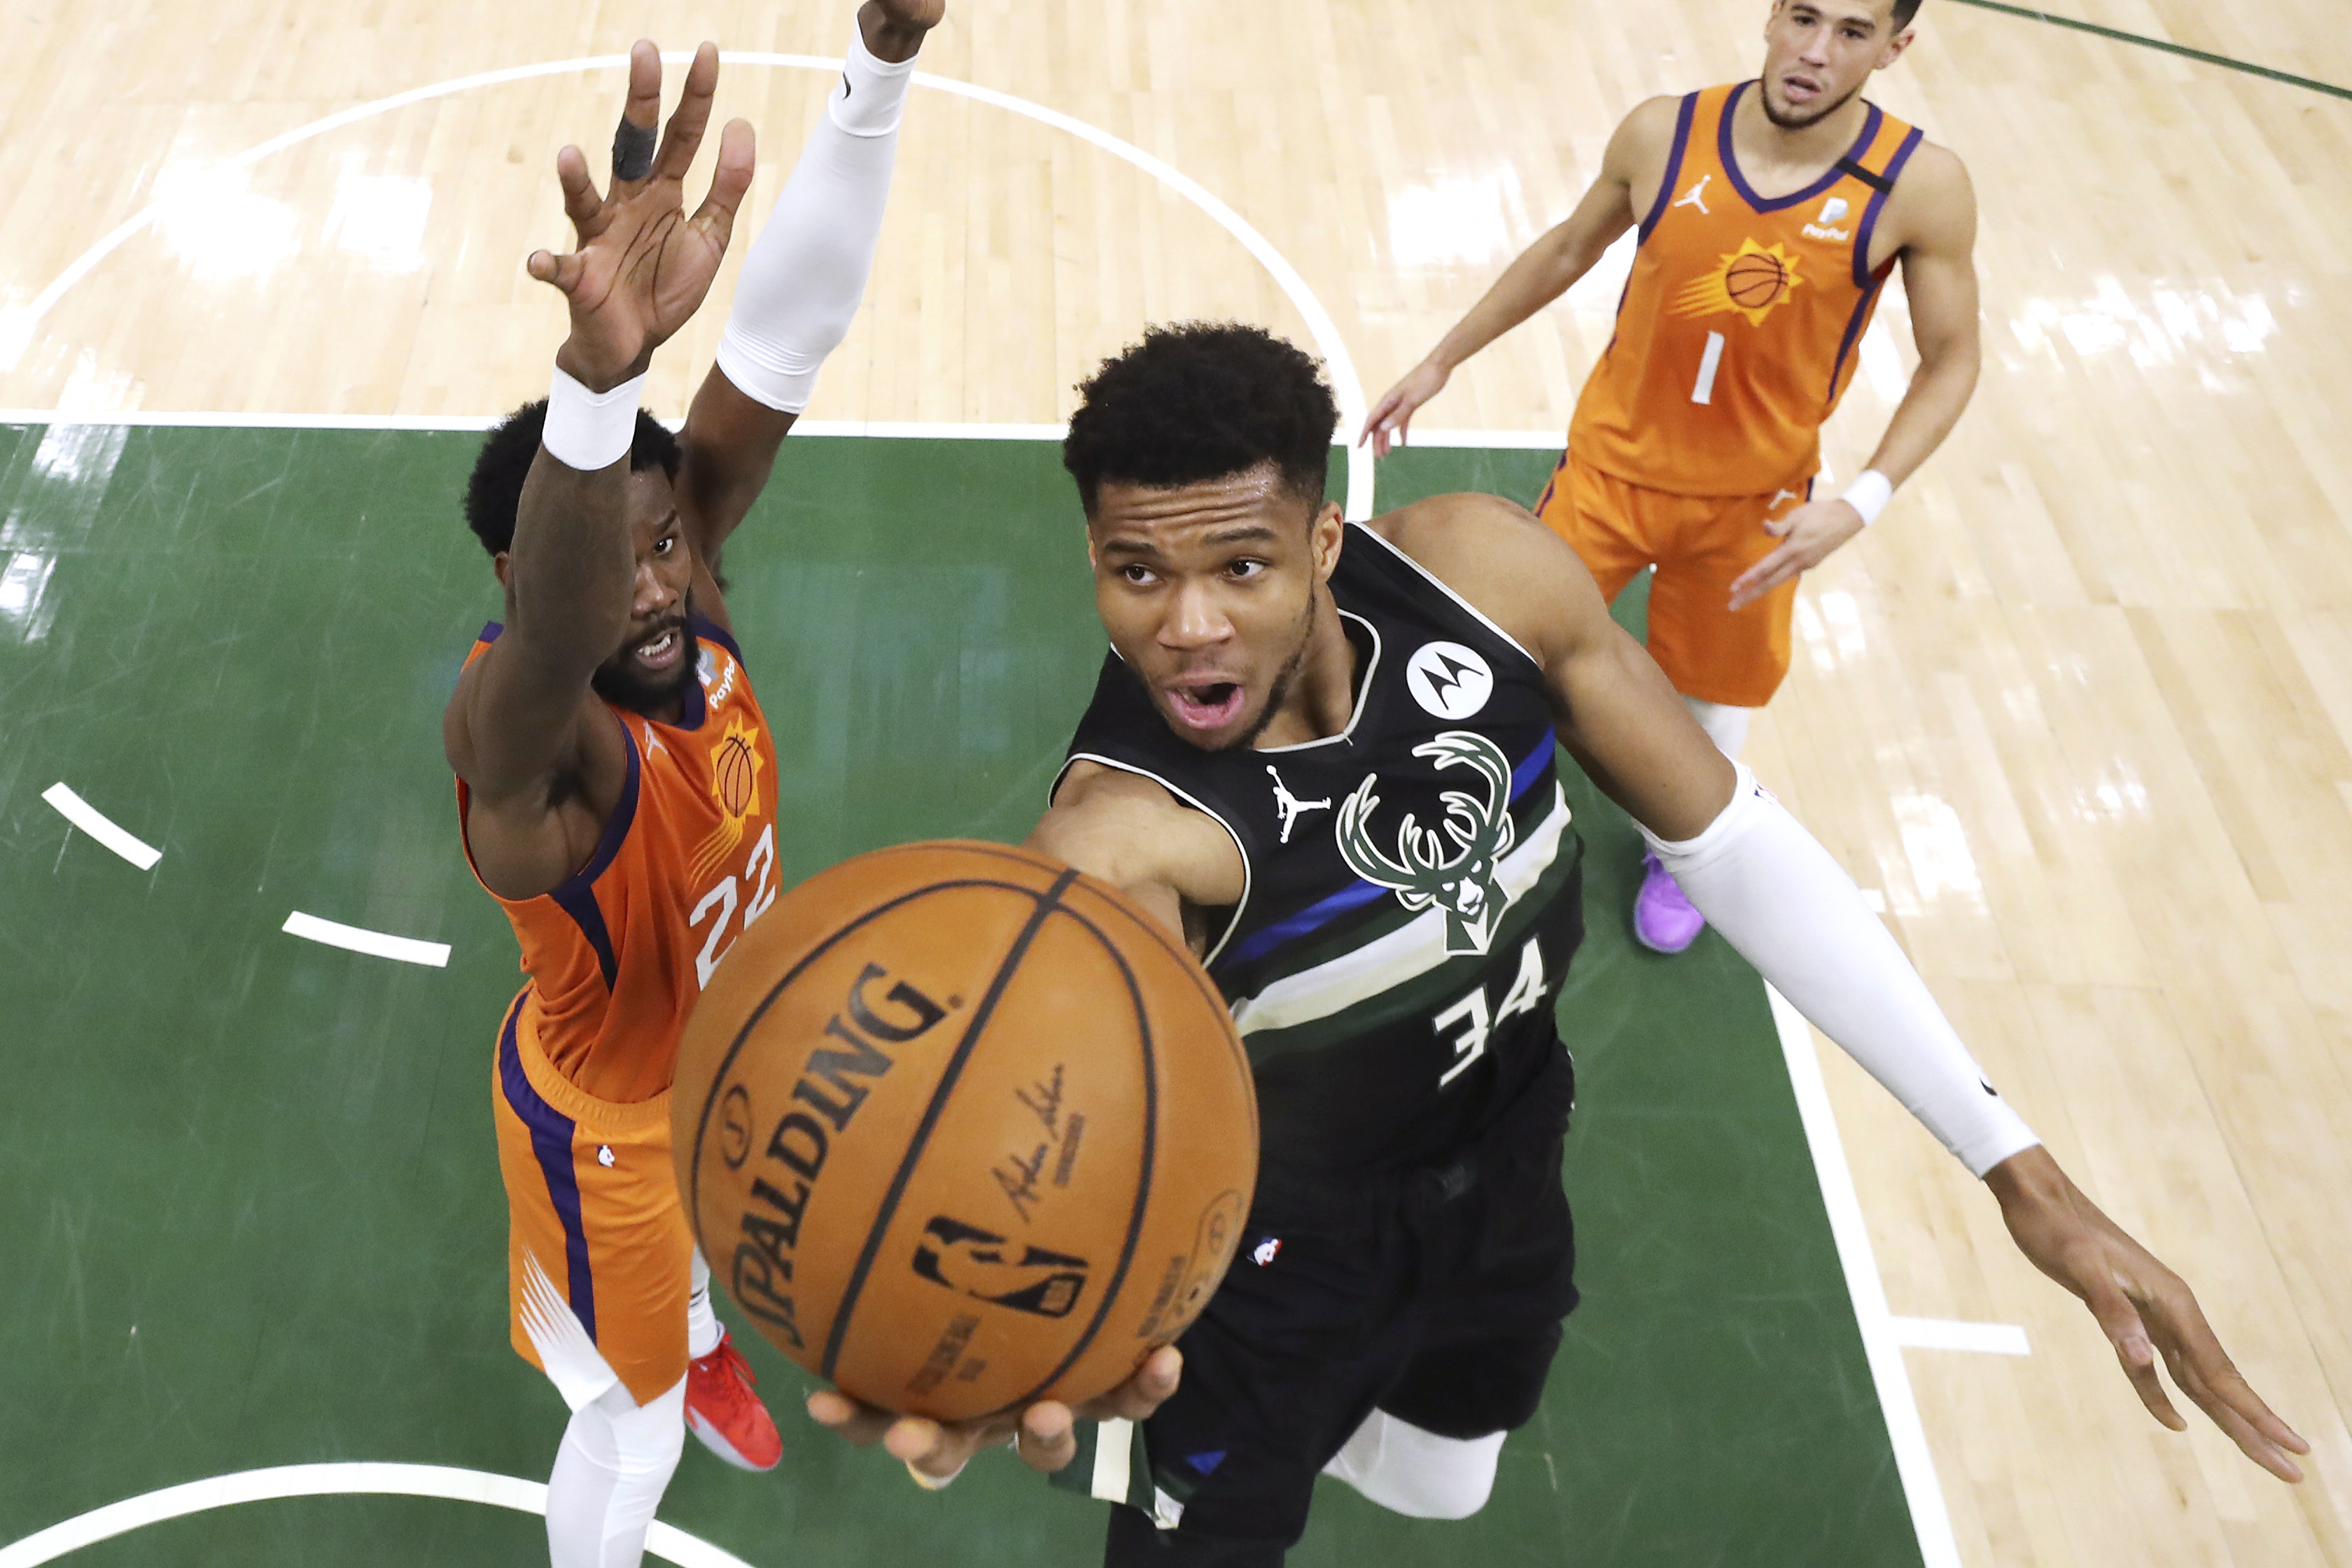 Giannis honors Jim Paschke with t-shirt postgame NBA Finals